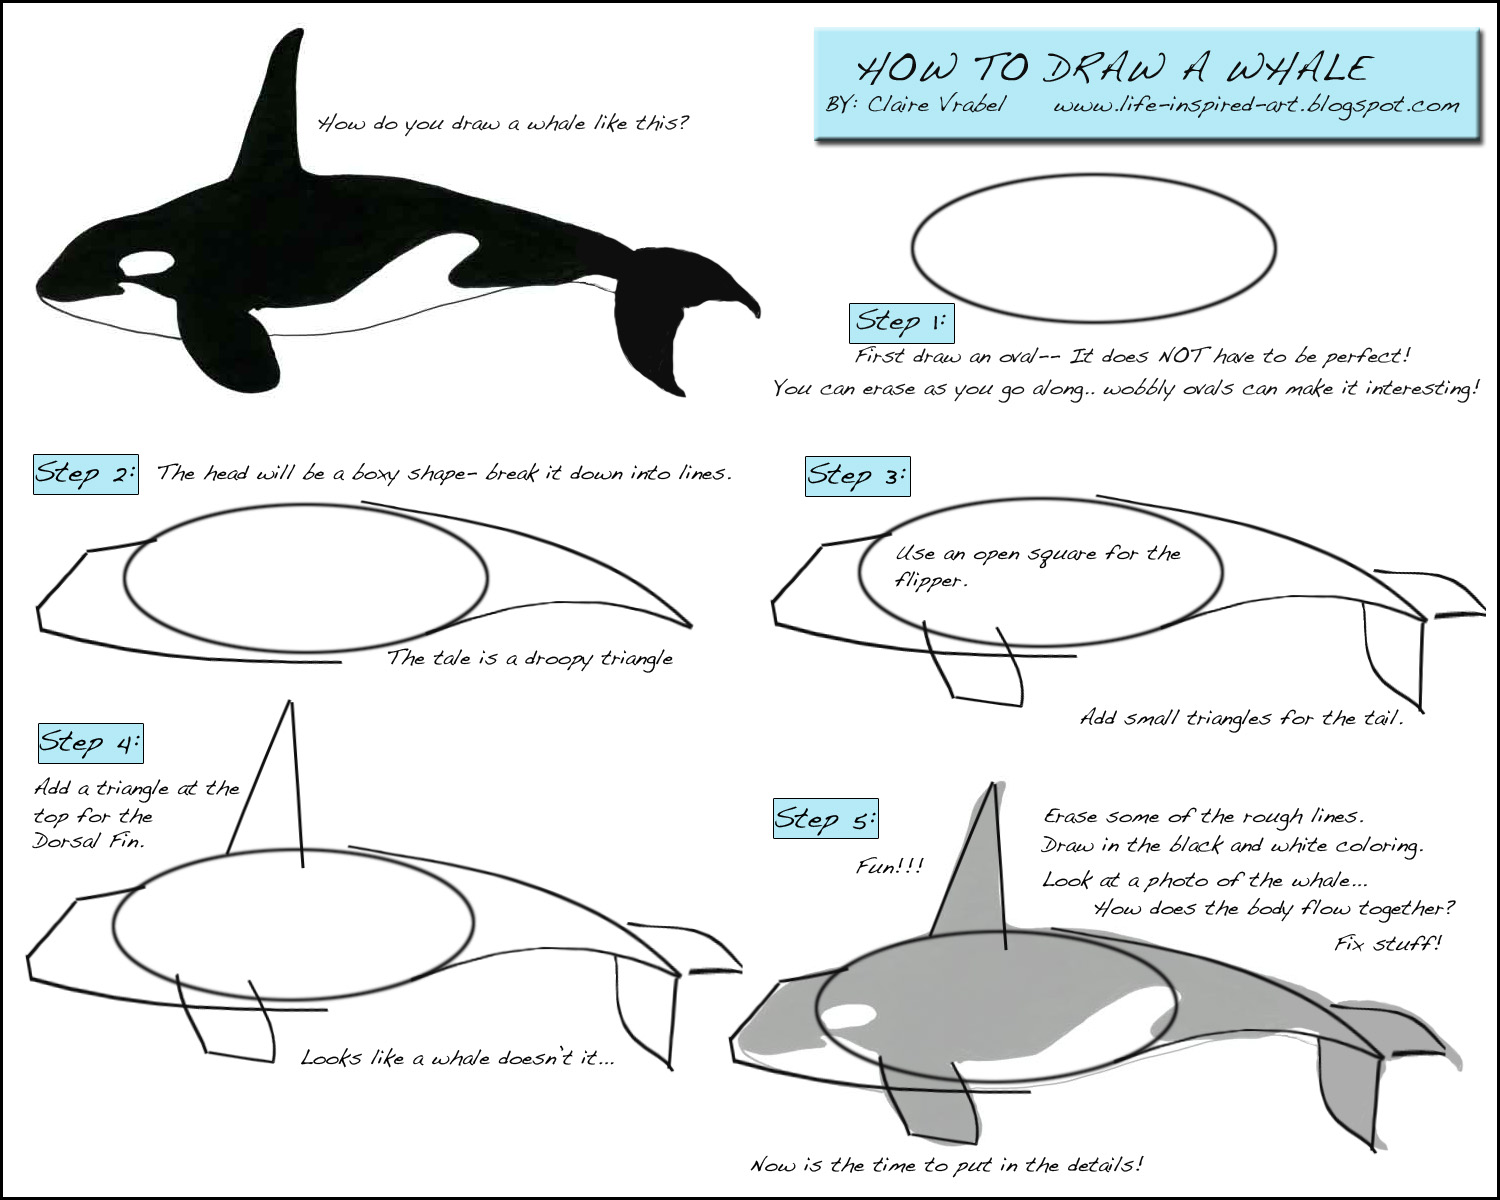 Life Inspired Art: How to Draw a Whale!